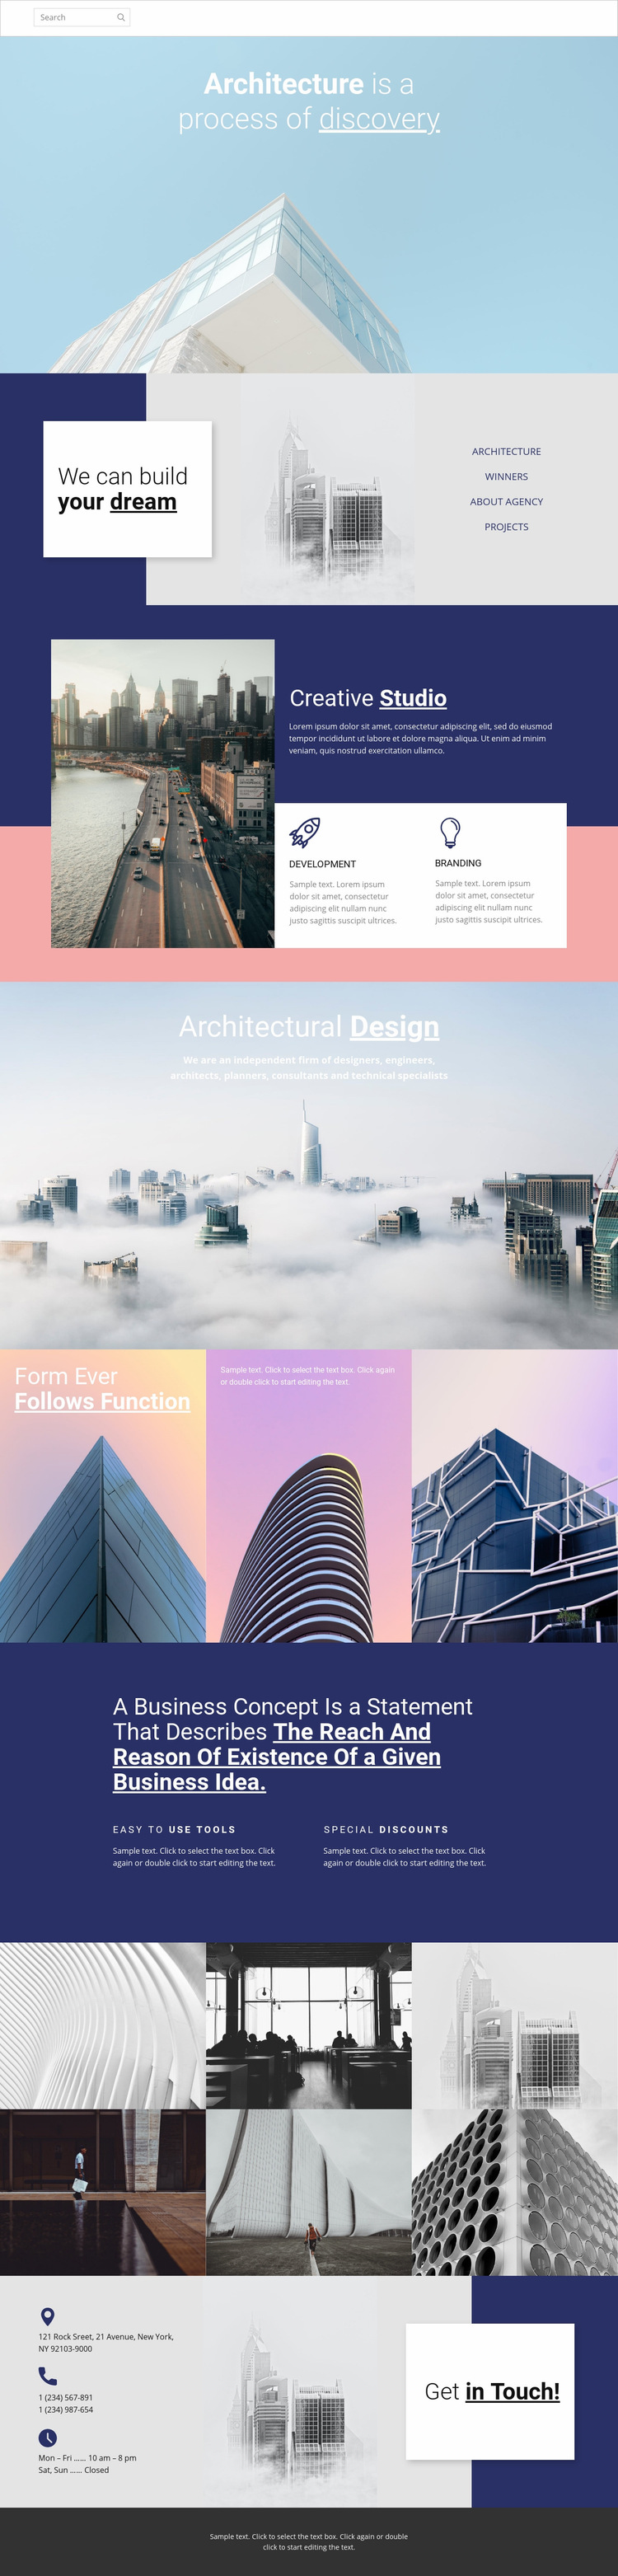 Wonders of architecture Web Page Design